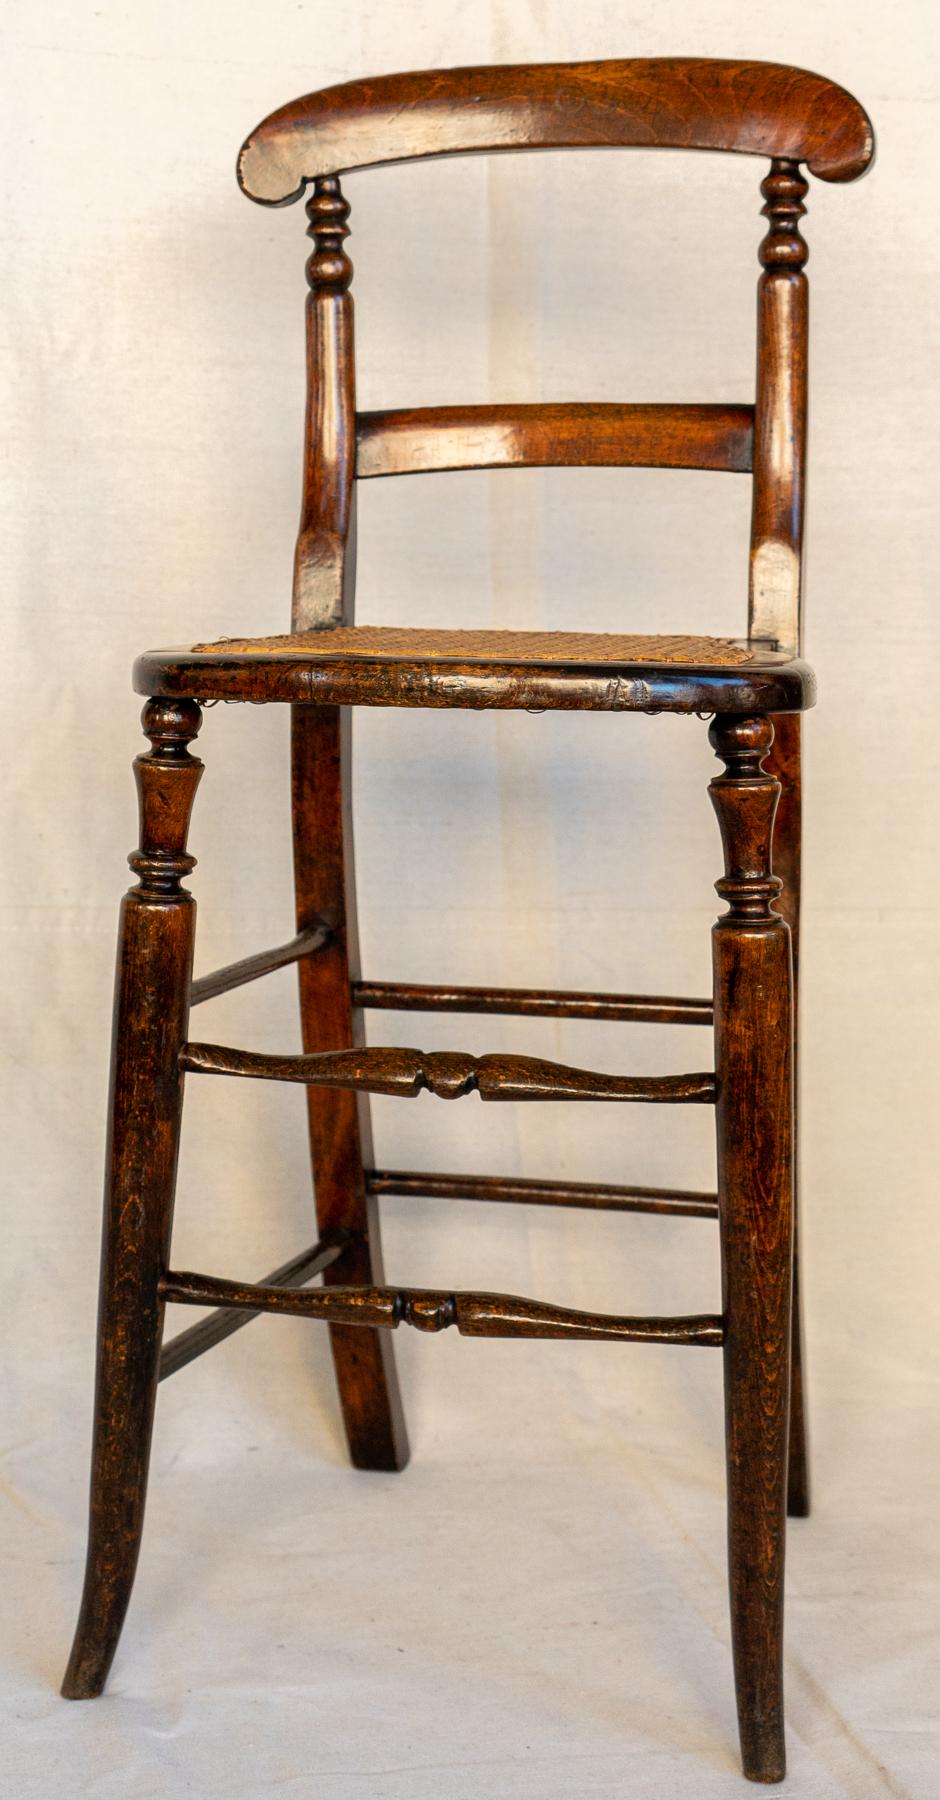 19th century English posture / discipline chair. Circa 1860. Diminutive tall stool type chair, made for a child to sit upright and straight. These type of chairs became known as punishment or discipline chairs. The two from stretchers show a lot of